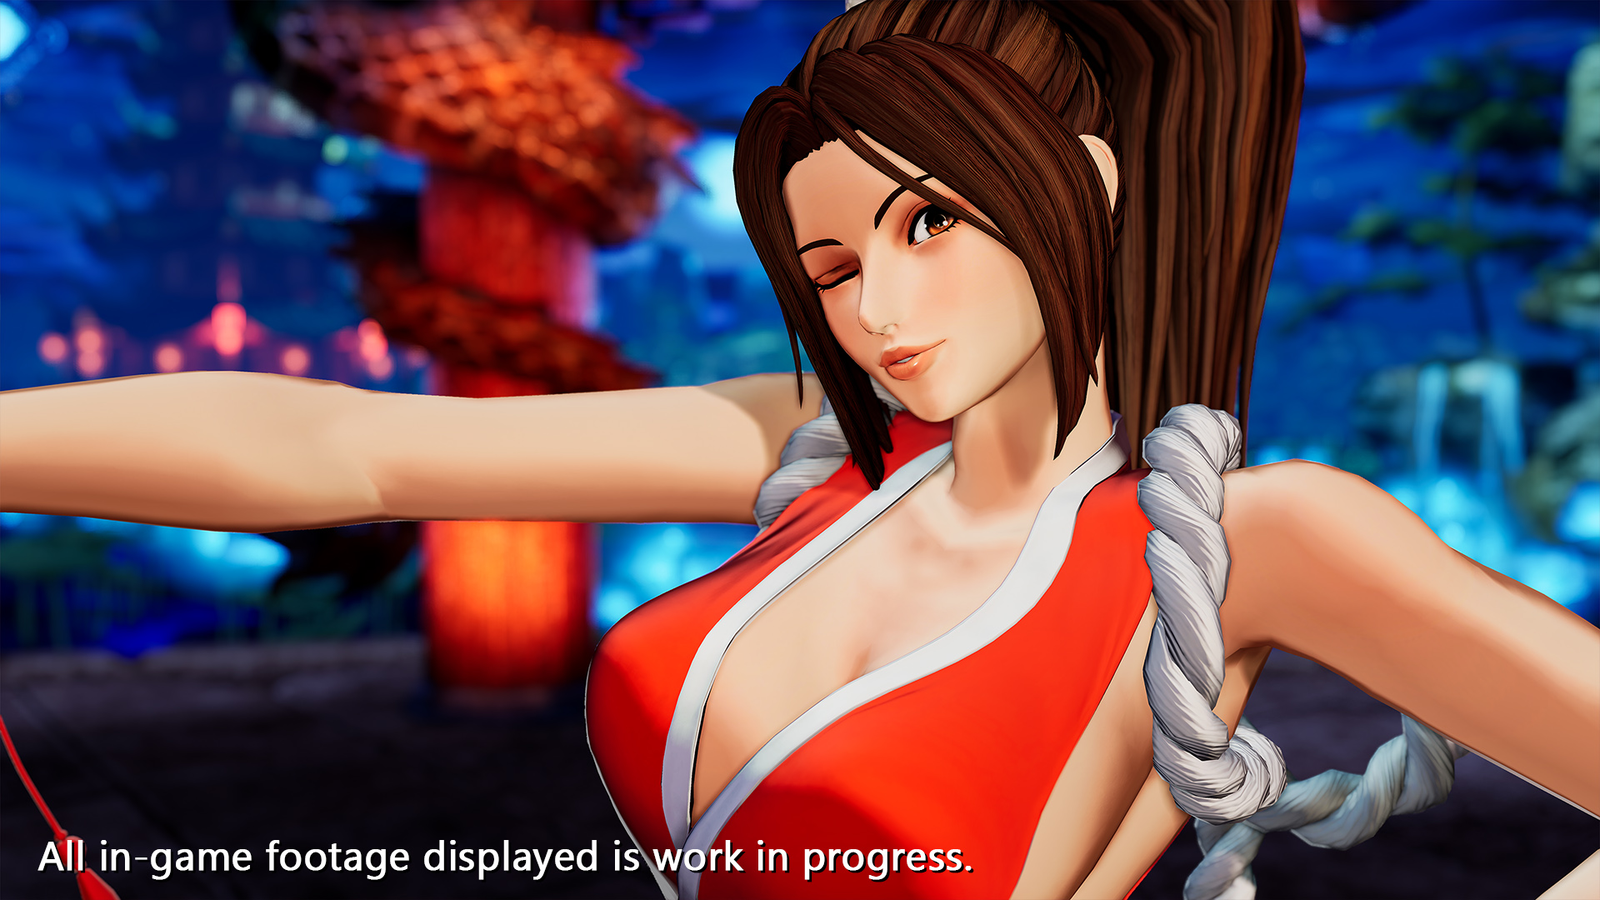 The King of Fighters XV Launches Today for Xbox Series X